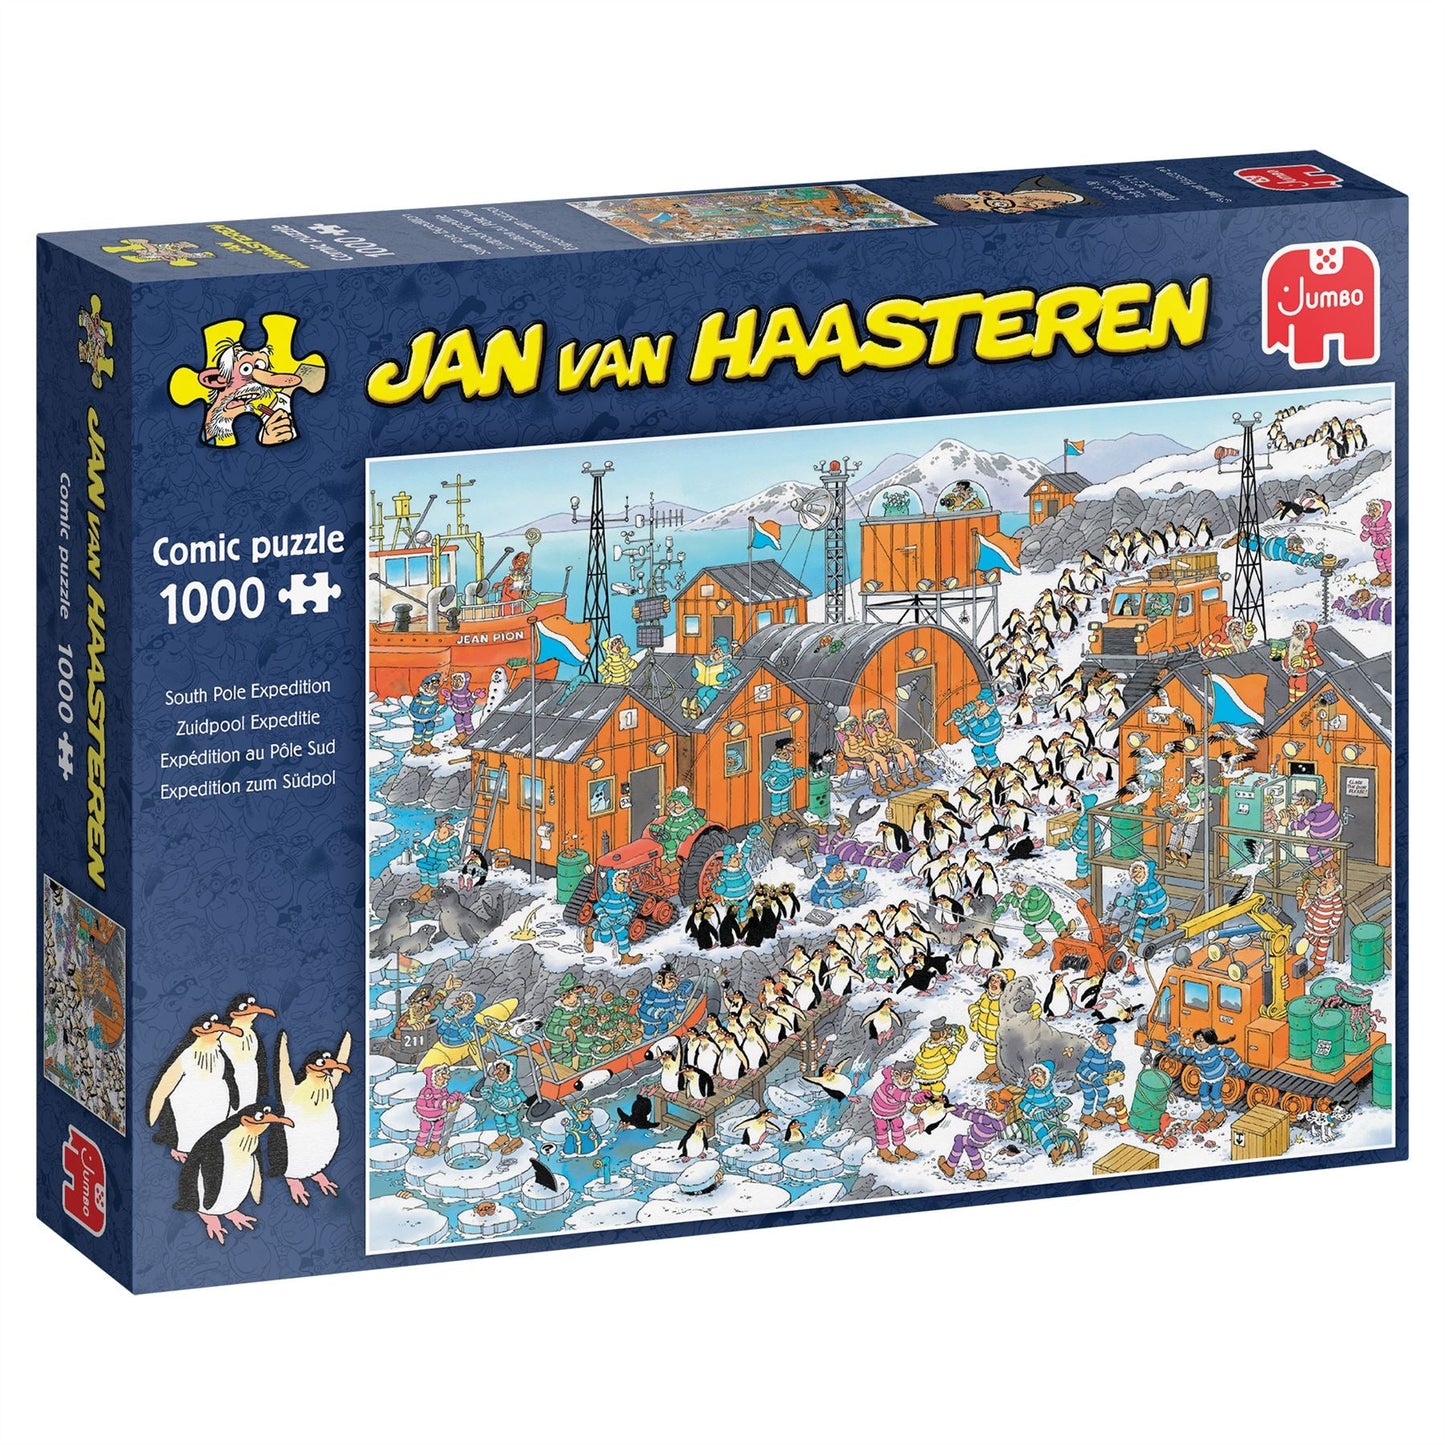 Jan van Haasteren South Pole Expedition 1000 Piece Jigsaw Puzzle box 2 